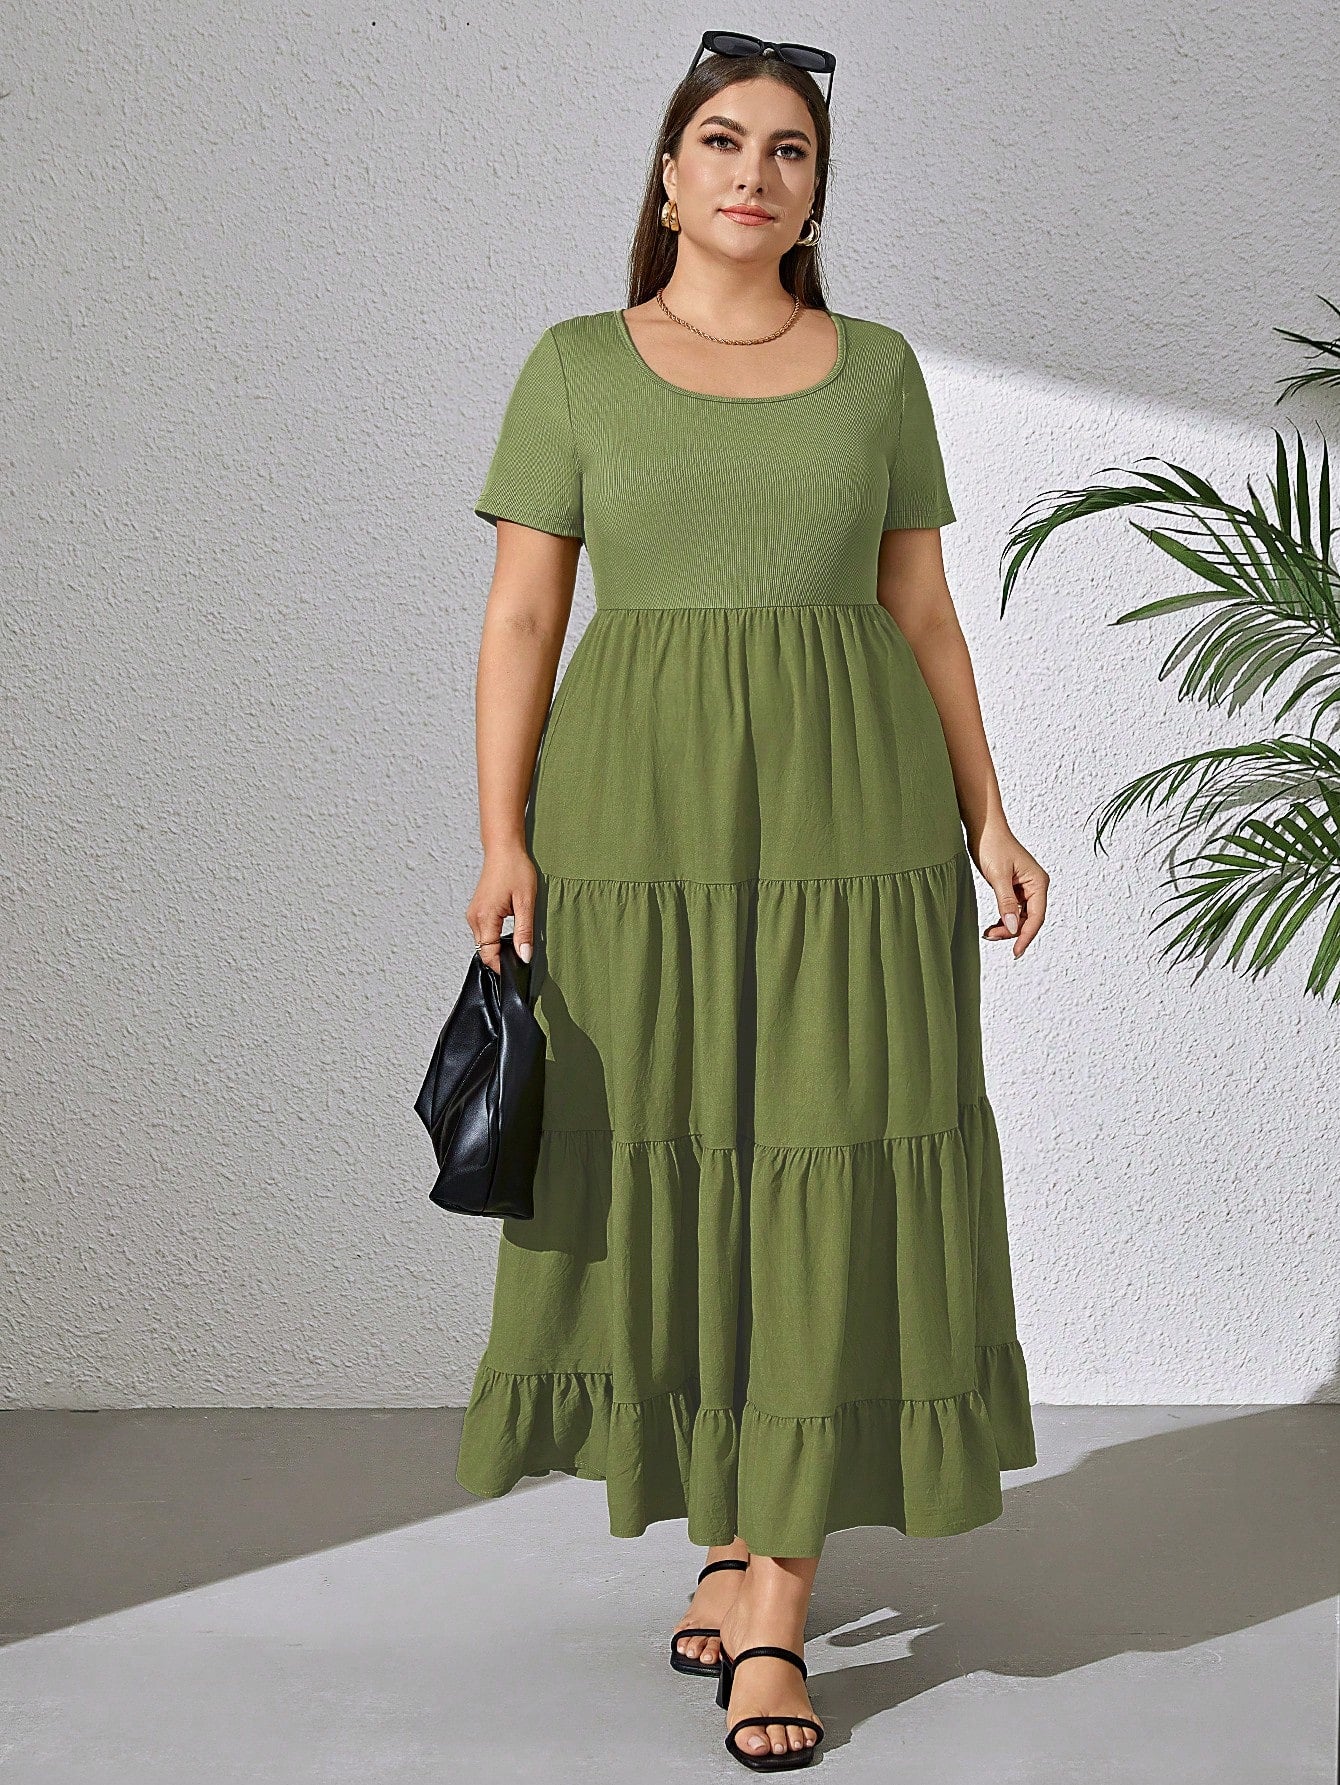 Women Plus Size Short Sleeve  Green Dress With Square Collar For Casual Or Vacation